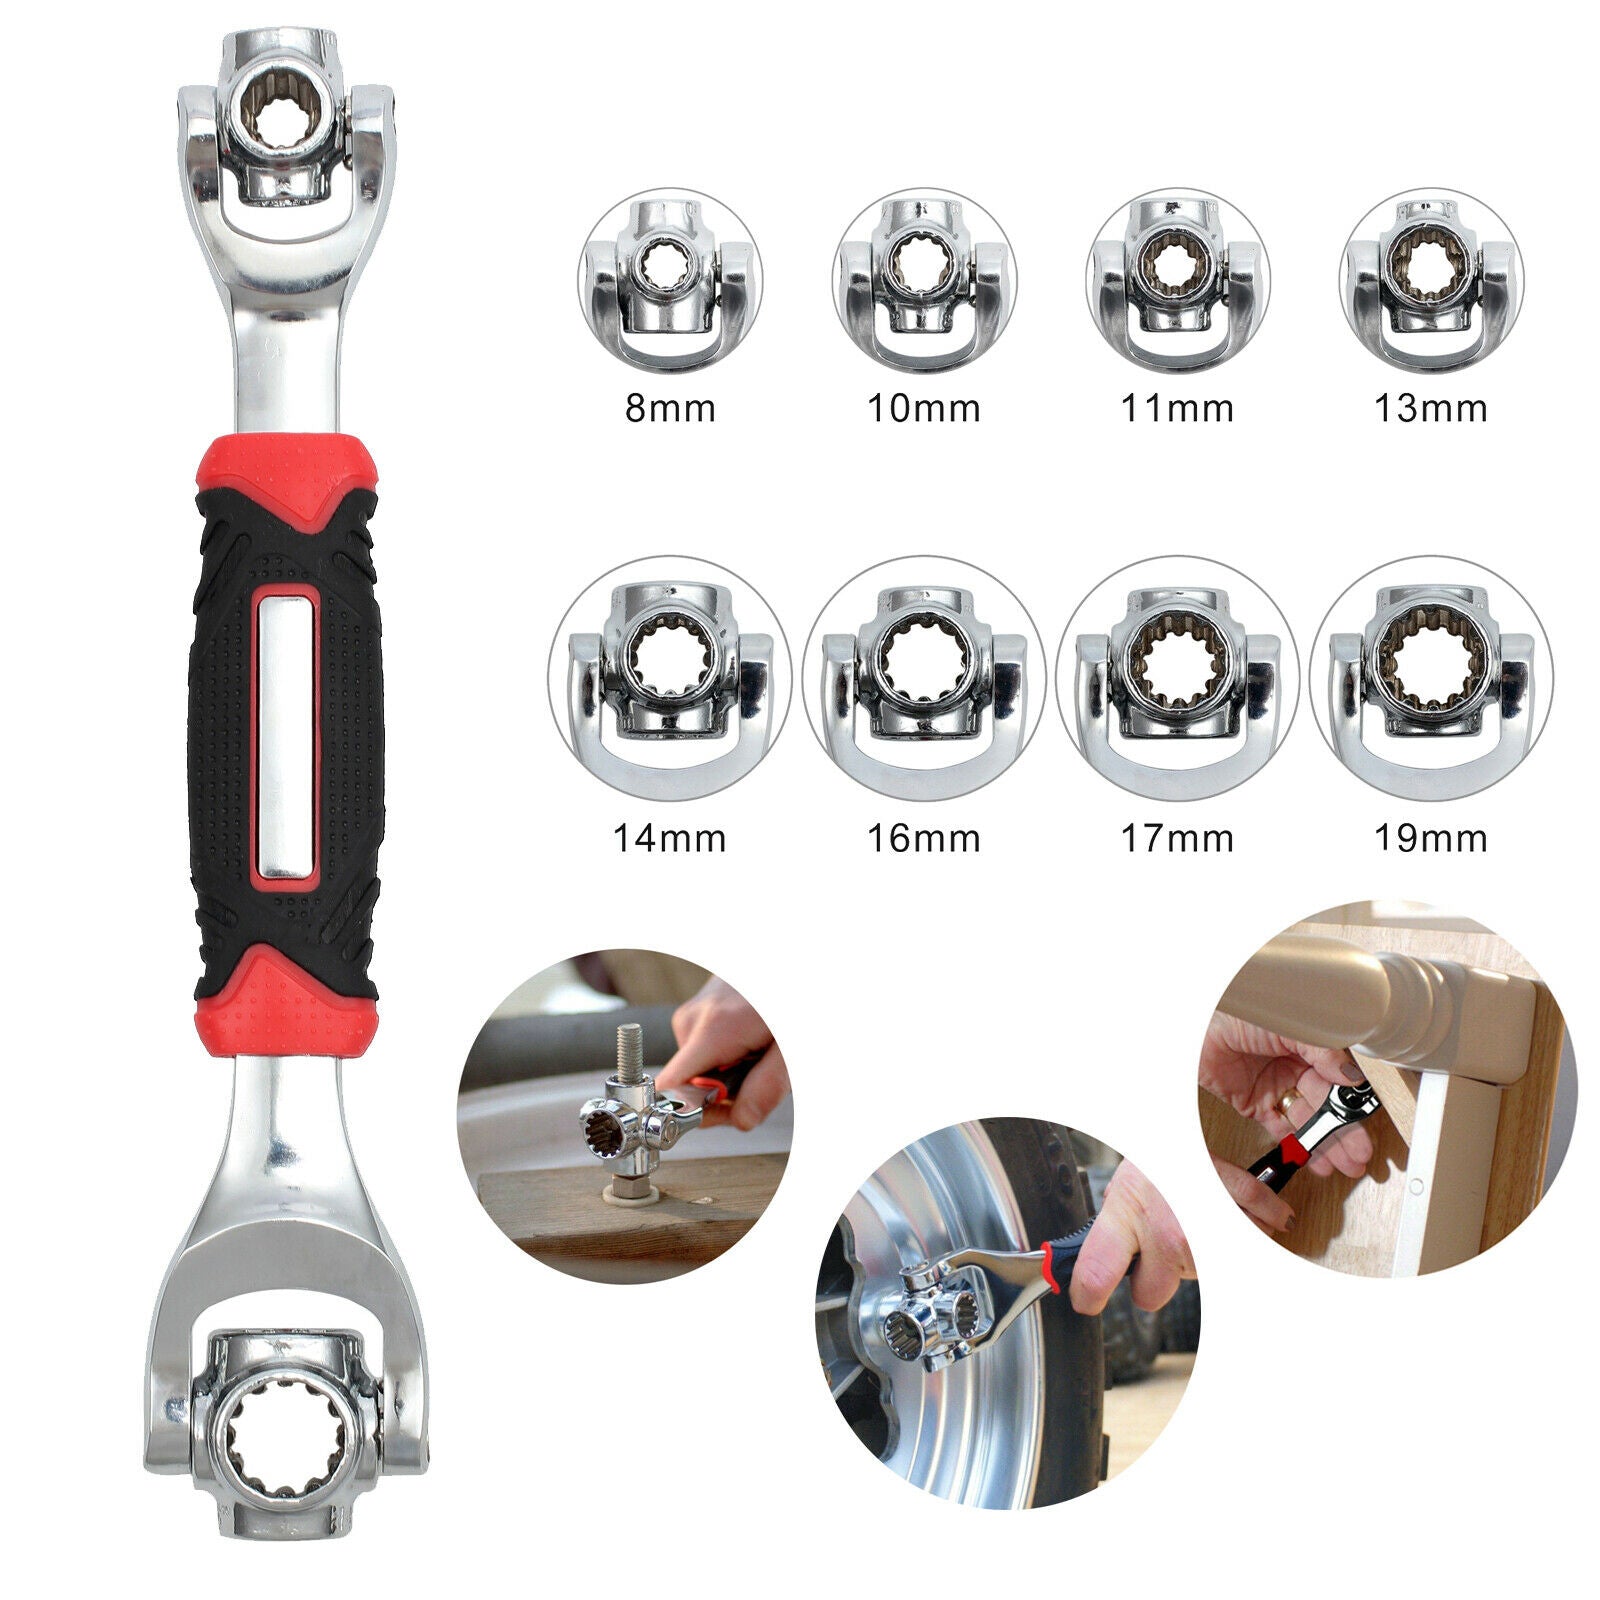 48-IN-1 Socket Wrench Universal Wrench Tiger Tools Dog Bone Metric